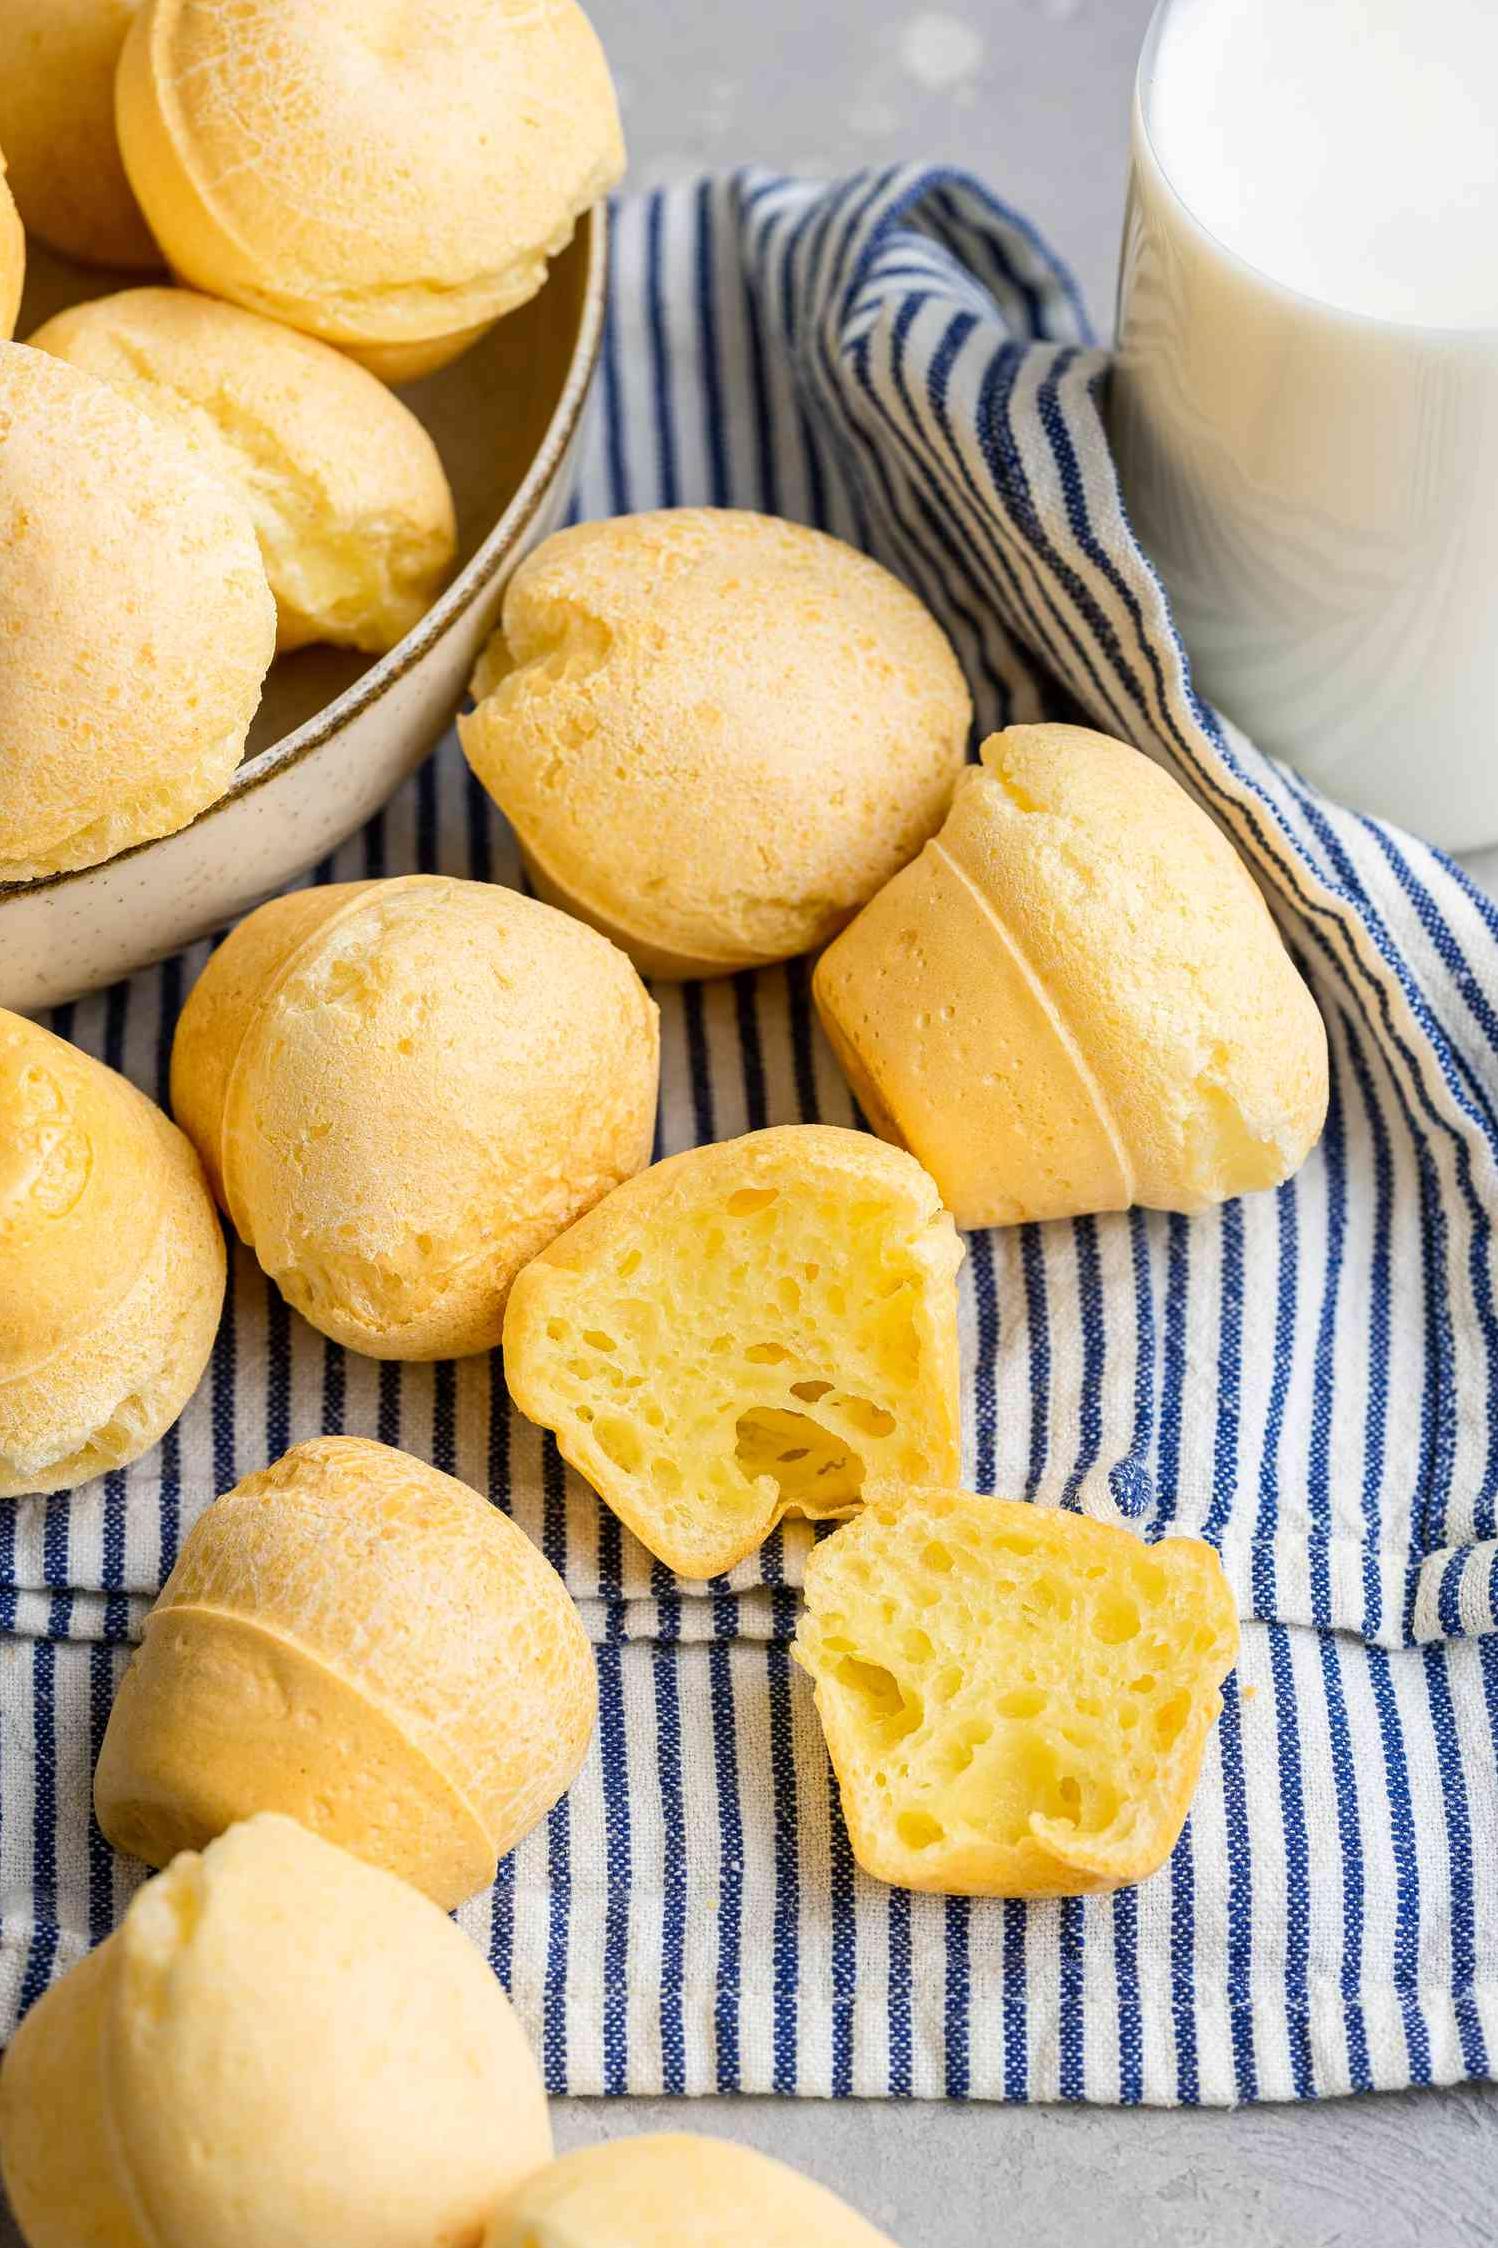  Get ready to fall in love with the cheesy goodness of this Brazilian staple!